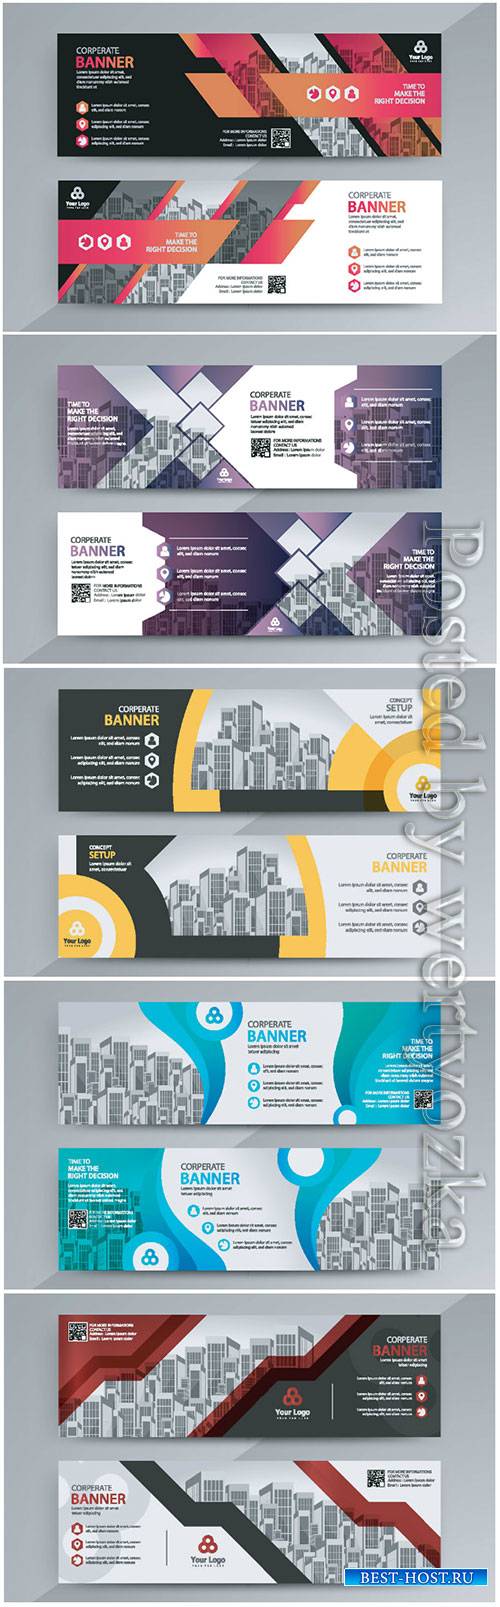 Horizontal advertising business banner layout template